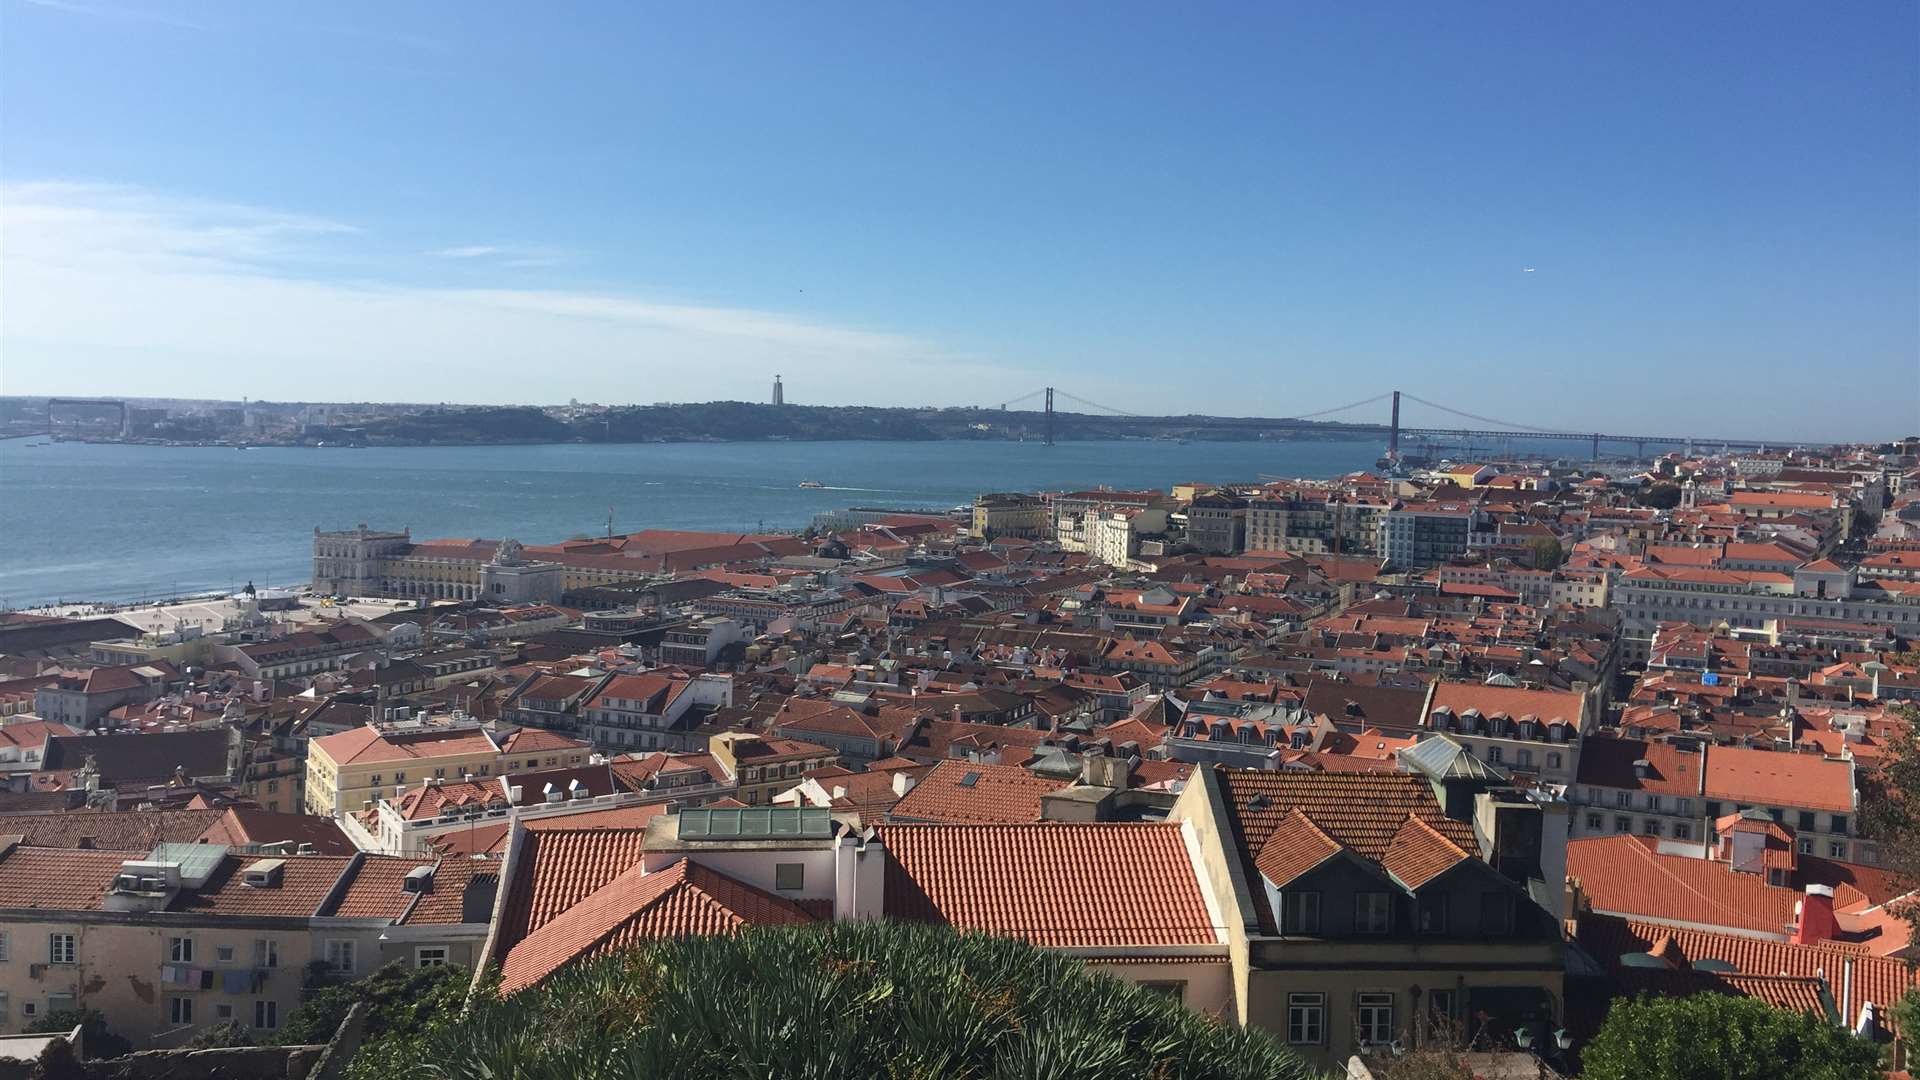 Views of the river Tagus, and rooftops, from São Jorge Castle